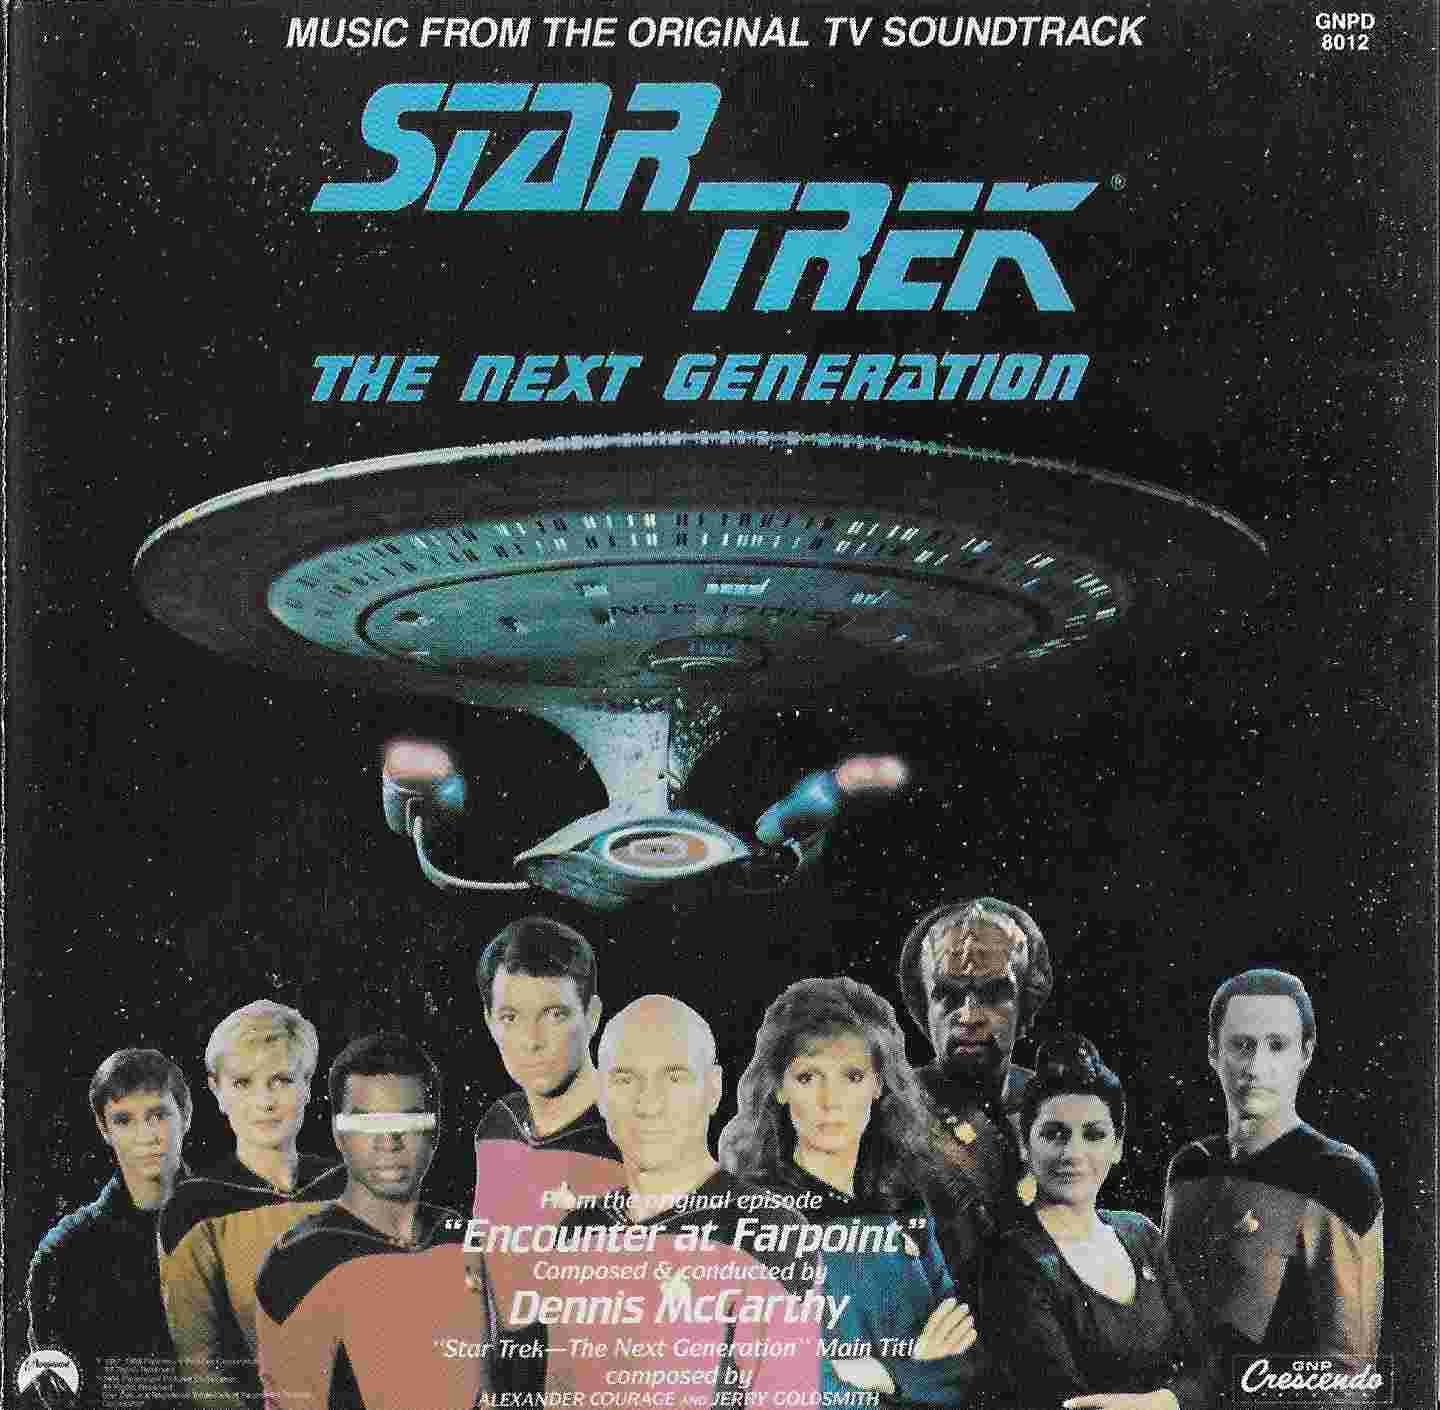 Picture of GNPD 8012 Star trek - The next generation by artist Dennis McCarthy from ITV, Channel 4 and Channel 5 cds library